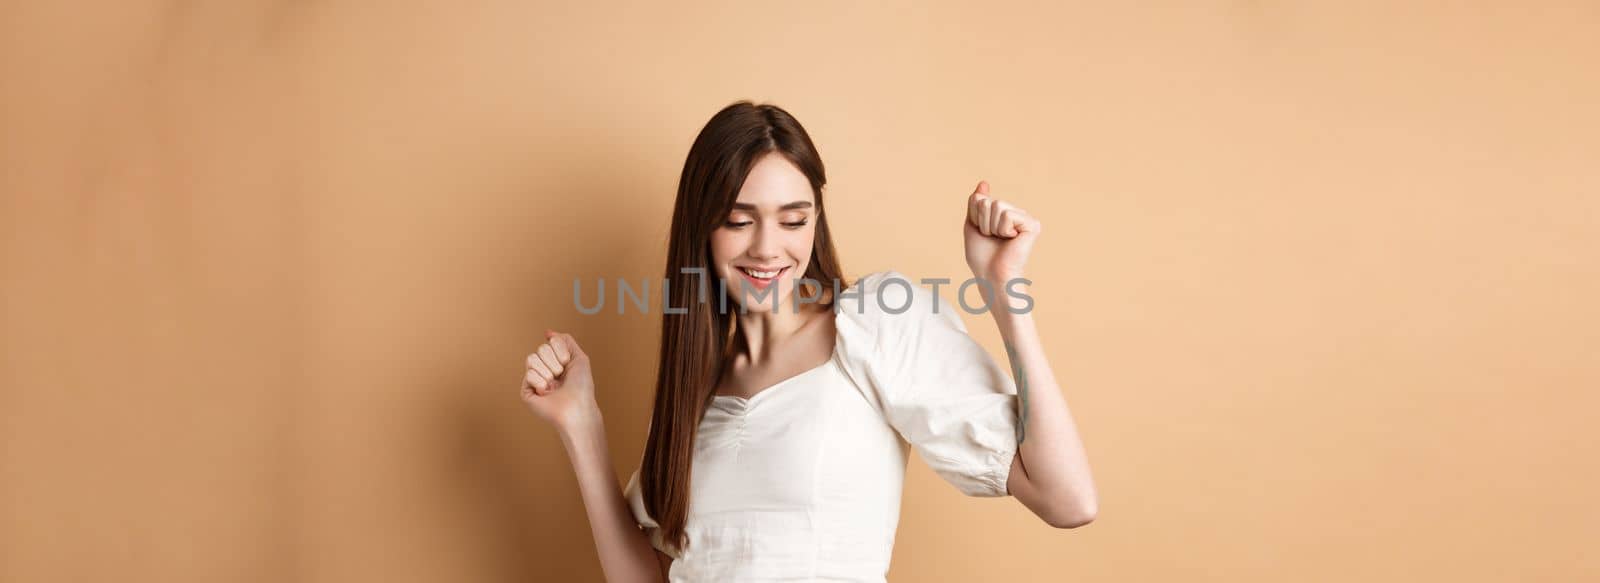 Carefree woman dancing and having fun, close eyes and smiling, standing on beige background.